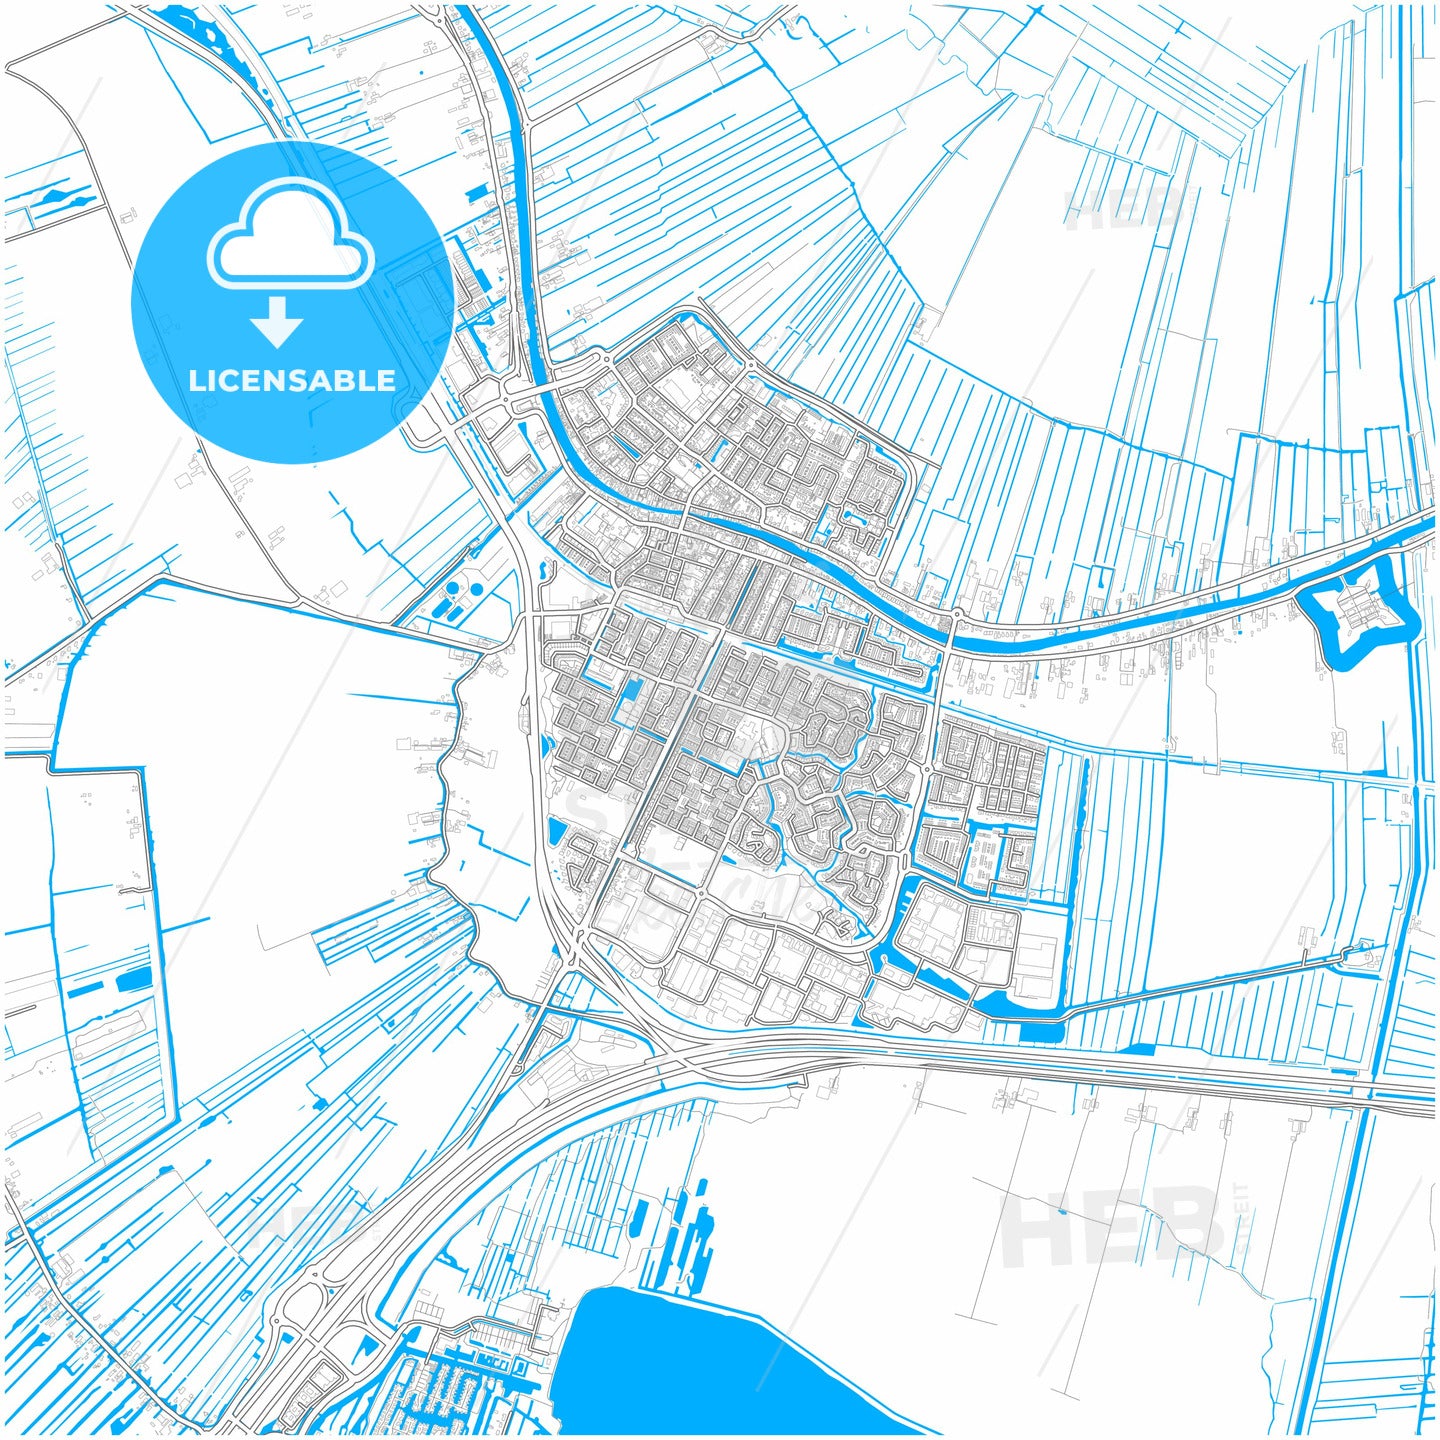 Bodegraven-Reeuwijk, South Holland, Netherlands, city map with high quality roads.